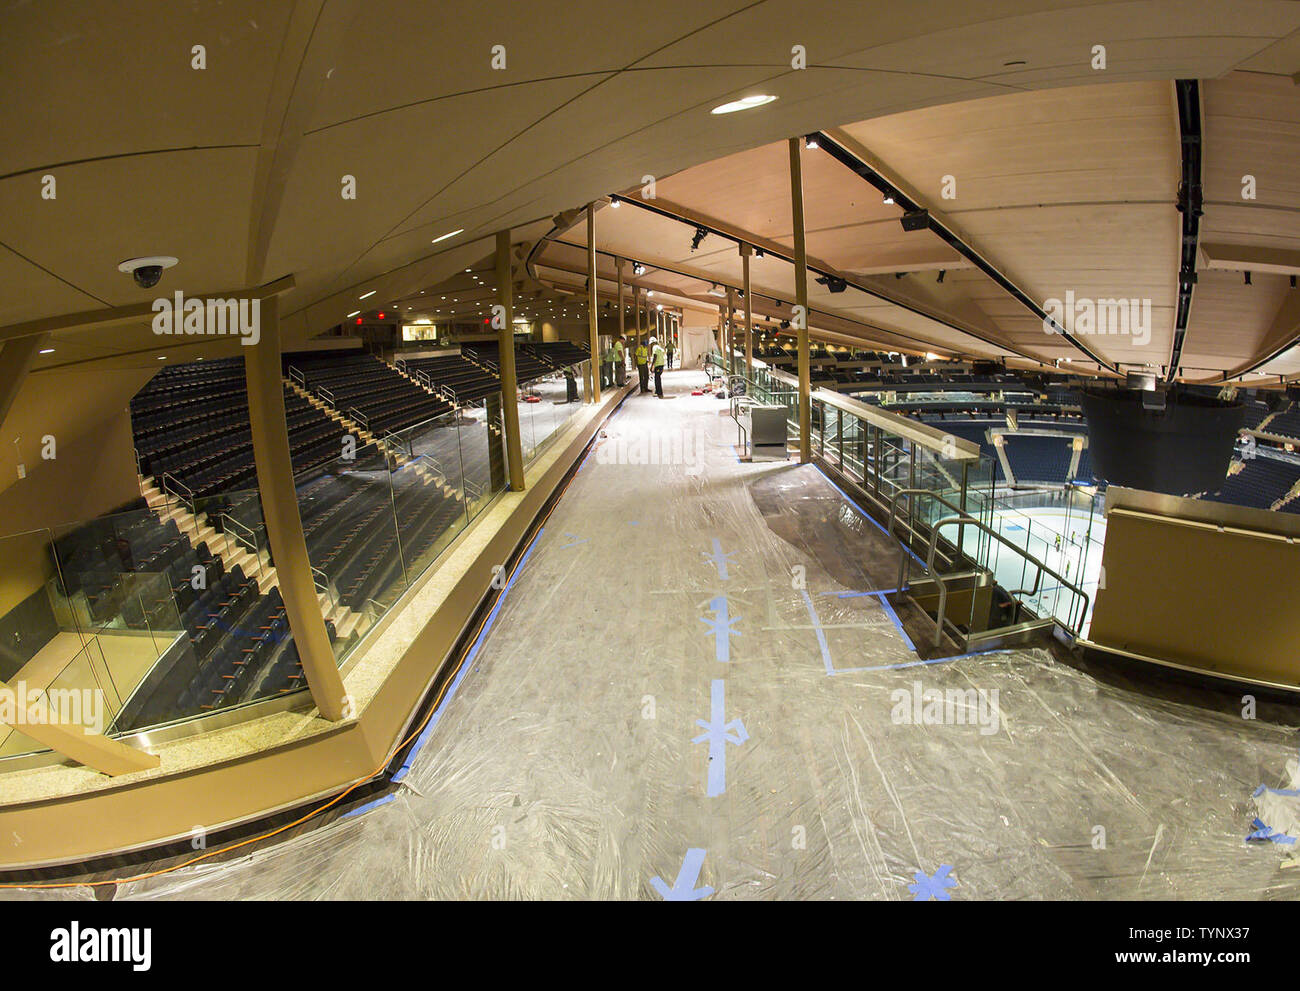 The Chase Bridges are fully installed at Madison Square Garden for the reopening of the arena after 3 years of on and off construction in New York City on October 16, 2013.  These photos show two revolutionary glass-walled seating bridges attached to the roof that hold 430 seats, each going for $110 to $210. The Garden has been shutting down for four to five months every year for the past three years to finish the billion-dollar renovation, which also includes wider concourses, mores suites and comfortable new balcony seating.     UPI/Rebecca Taylor/MSG Photos Stock Photo